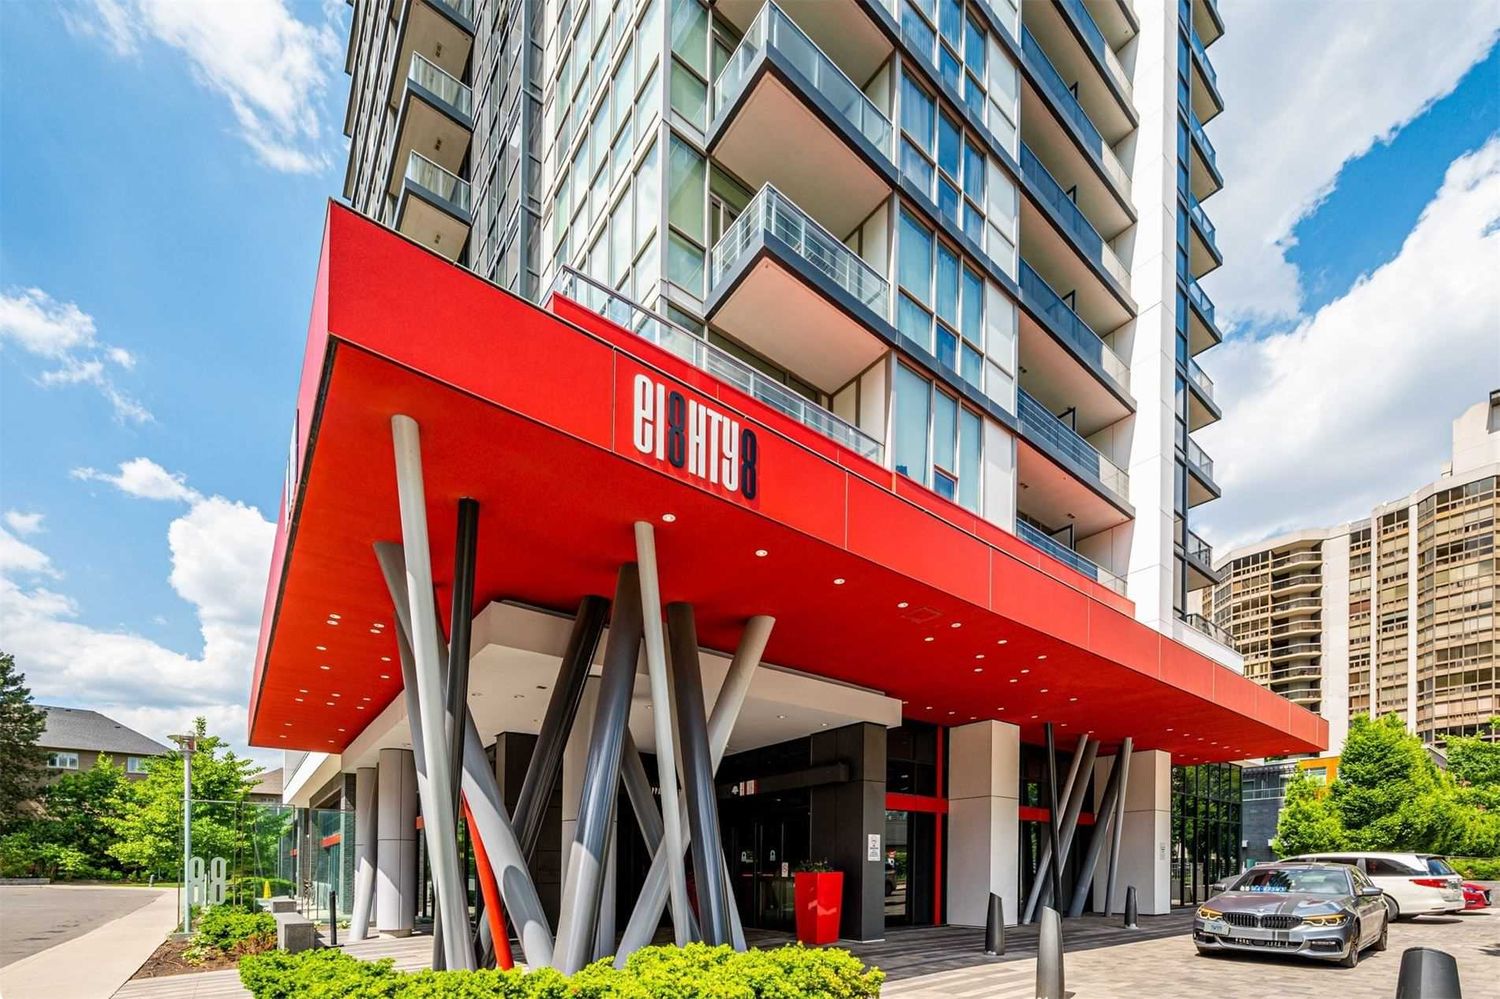 88 Sheppard Avenue E. EI8HTY8 Condos is located in  North York, Toronto - image #2 of 3